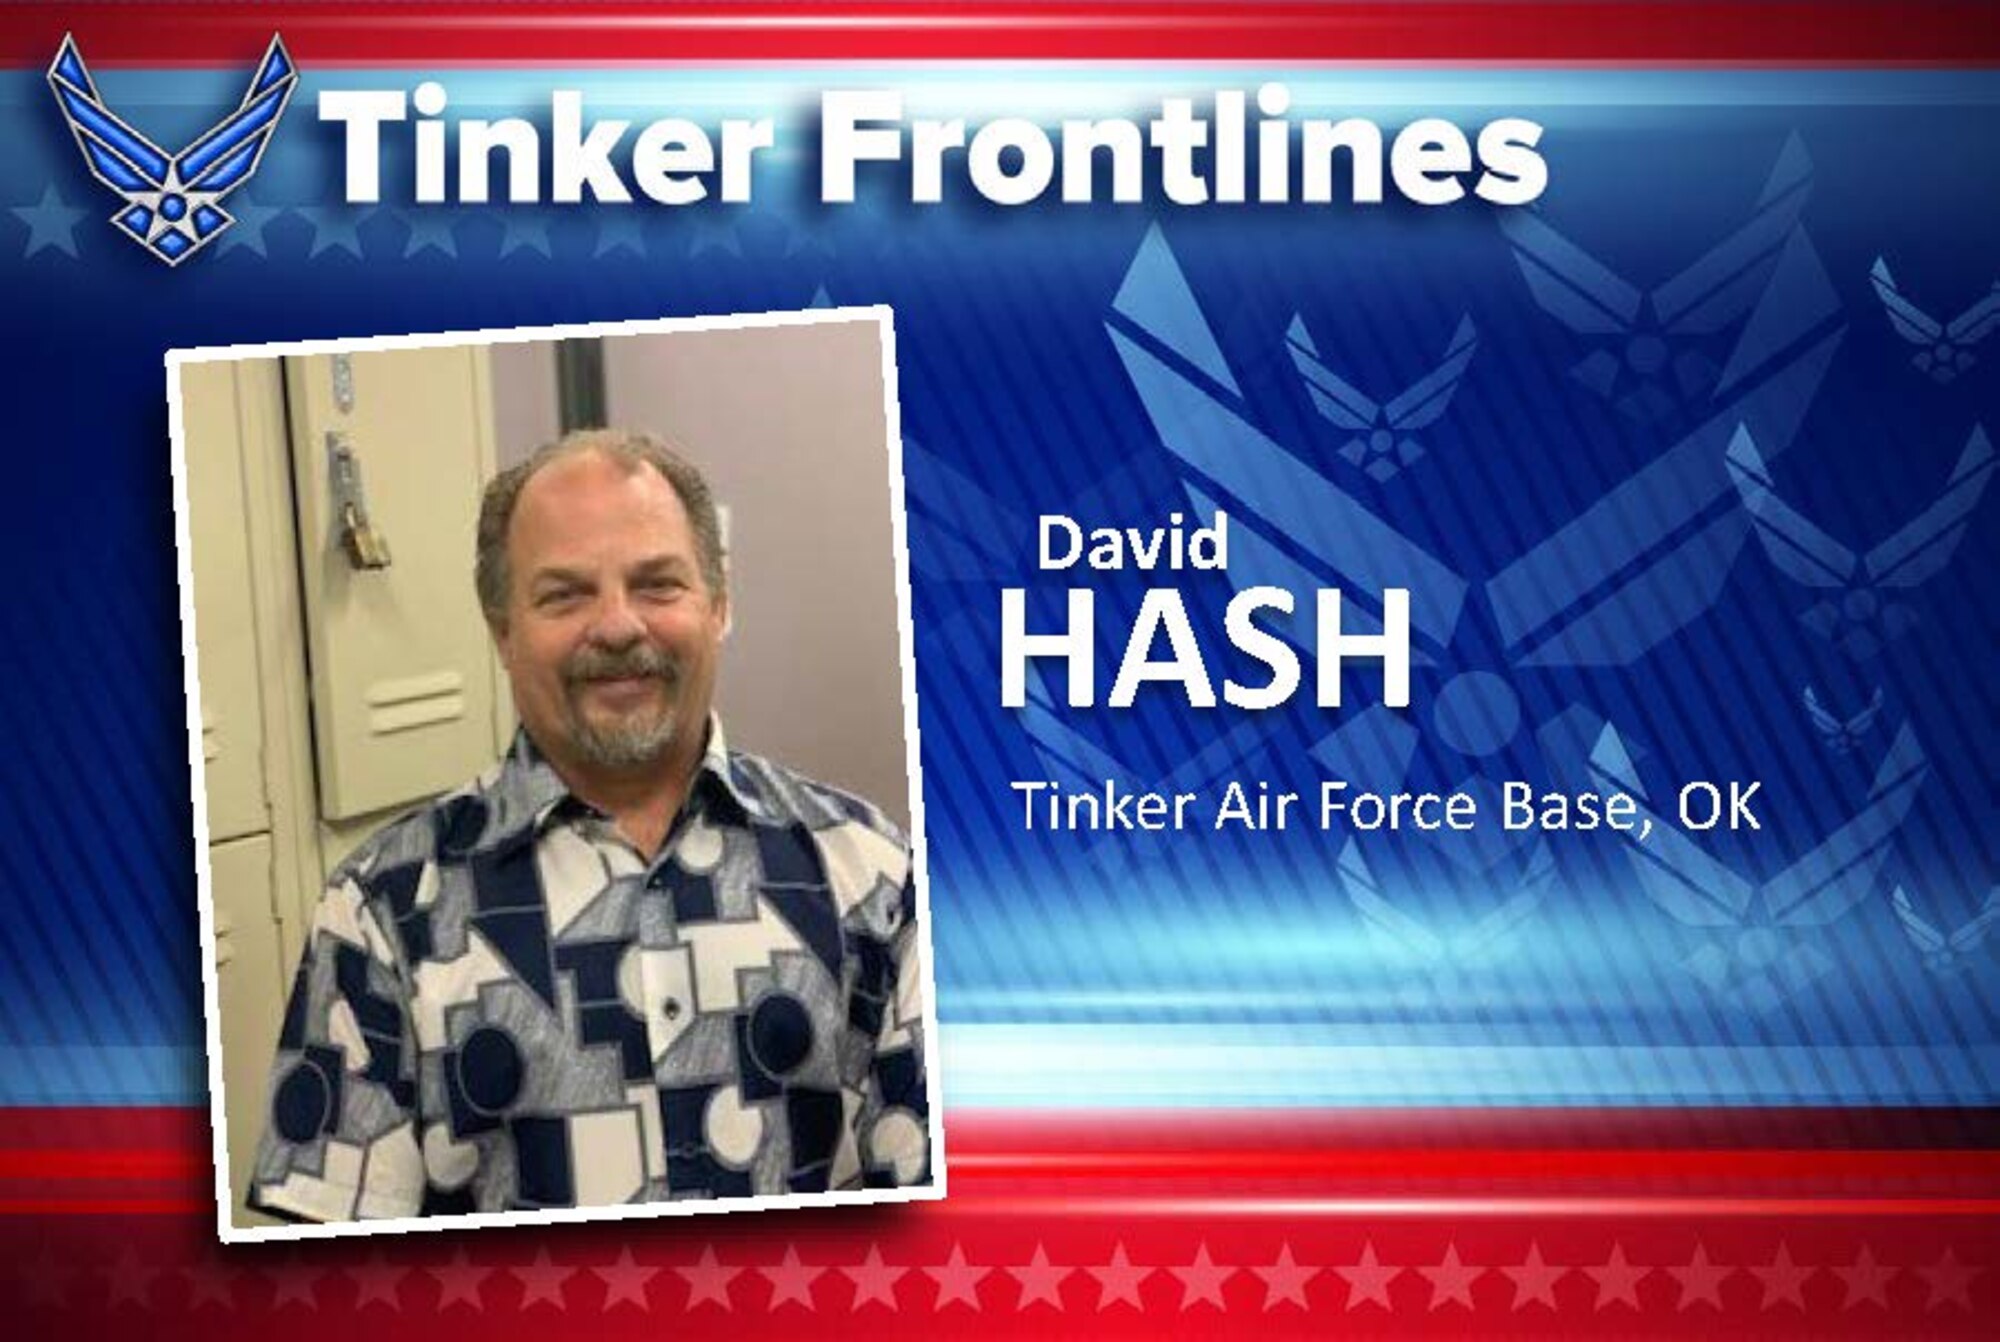 David Hash is a hazardous material specialist in the 76th Propulsion Maintenance Group.